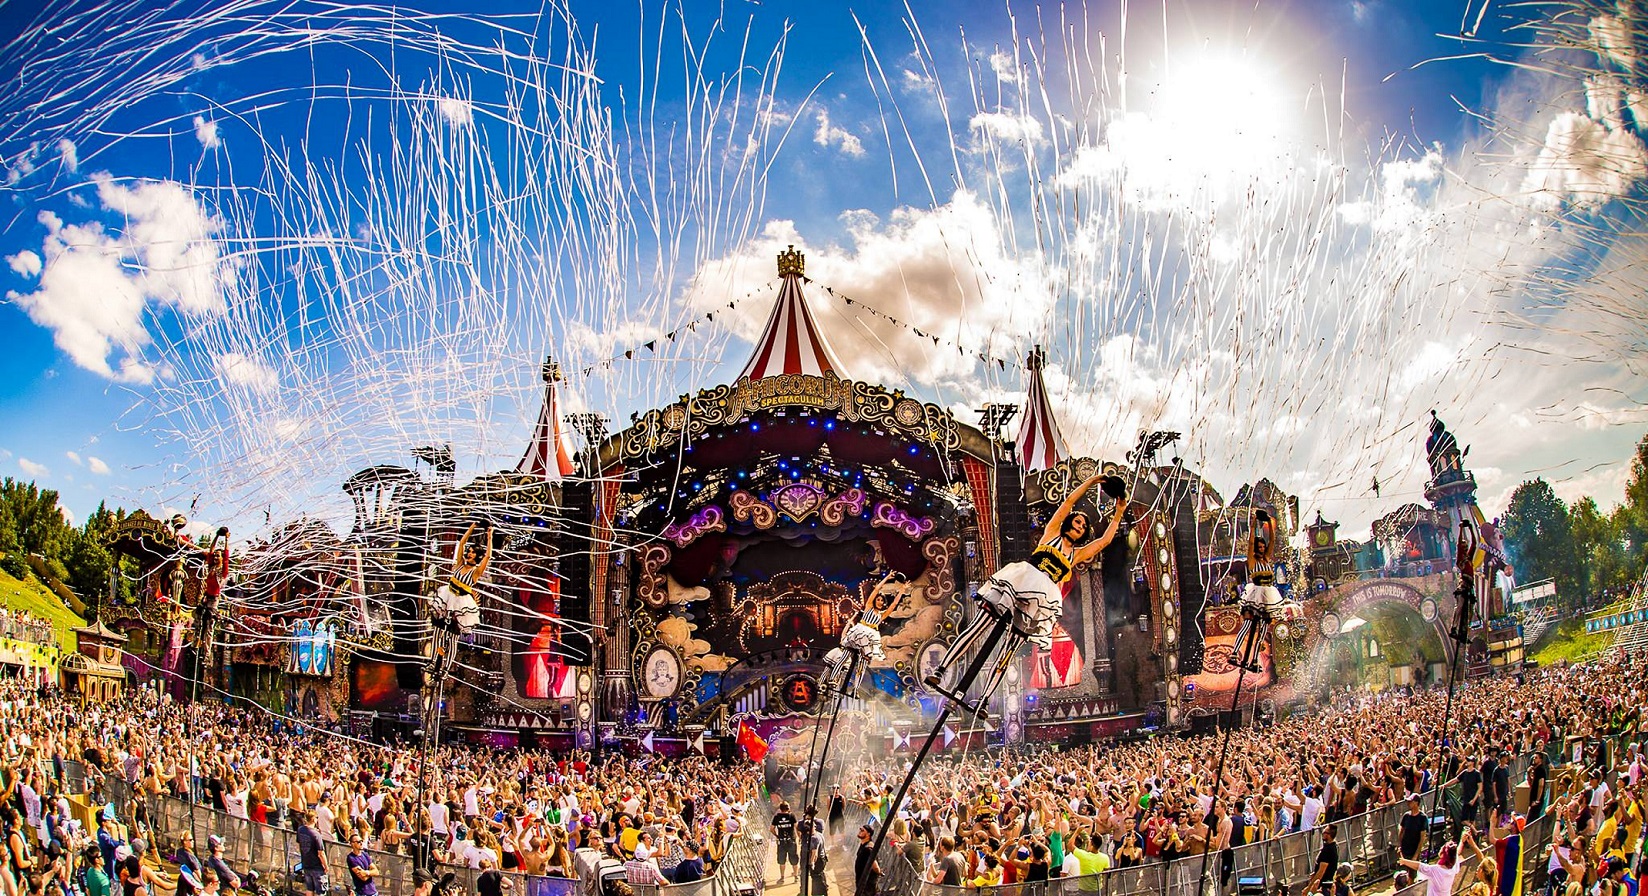 One of the world's largest music festivals takes place in sonic Boom